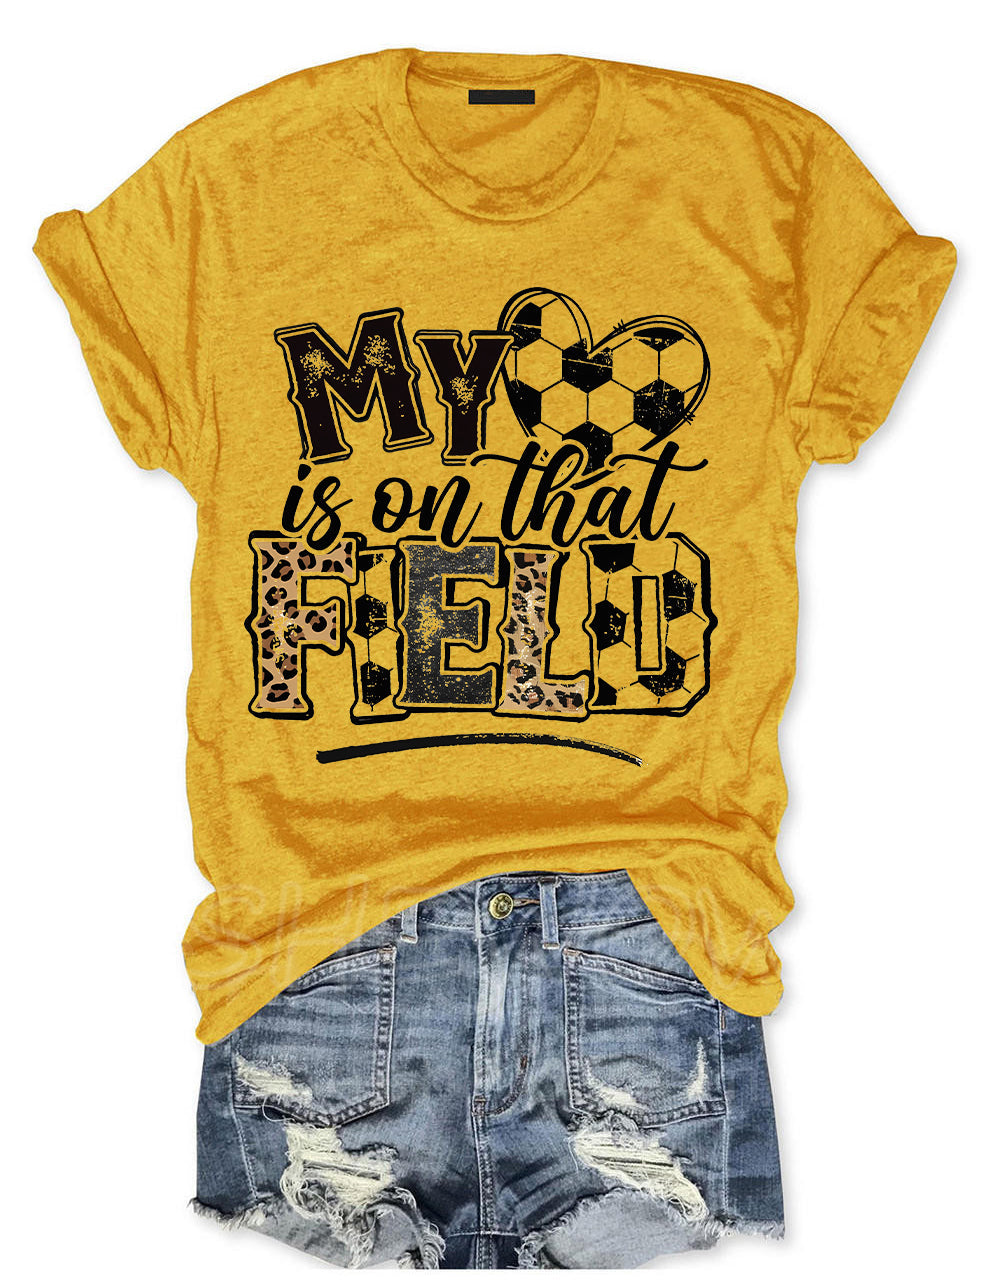 My heart is on that Field Soccer T-shirt